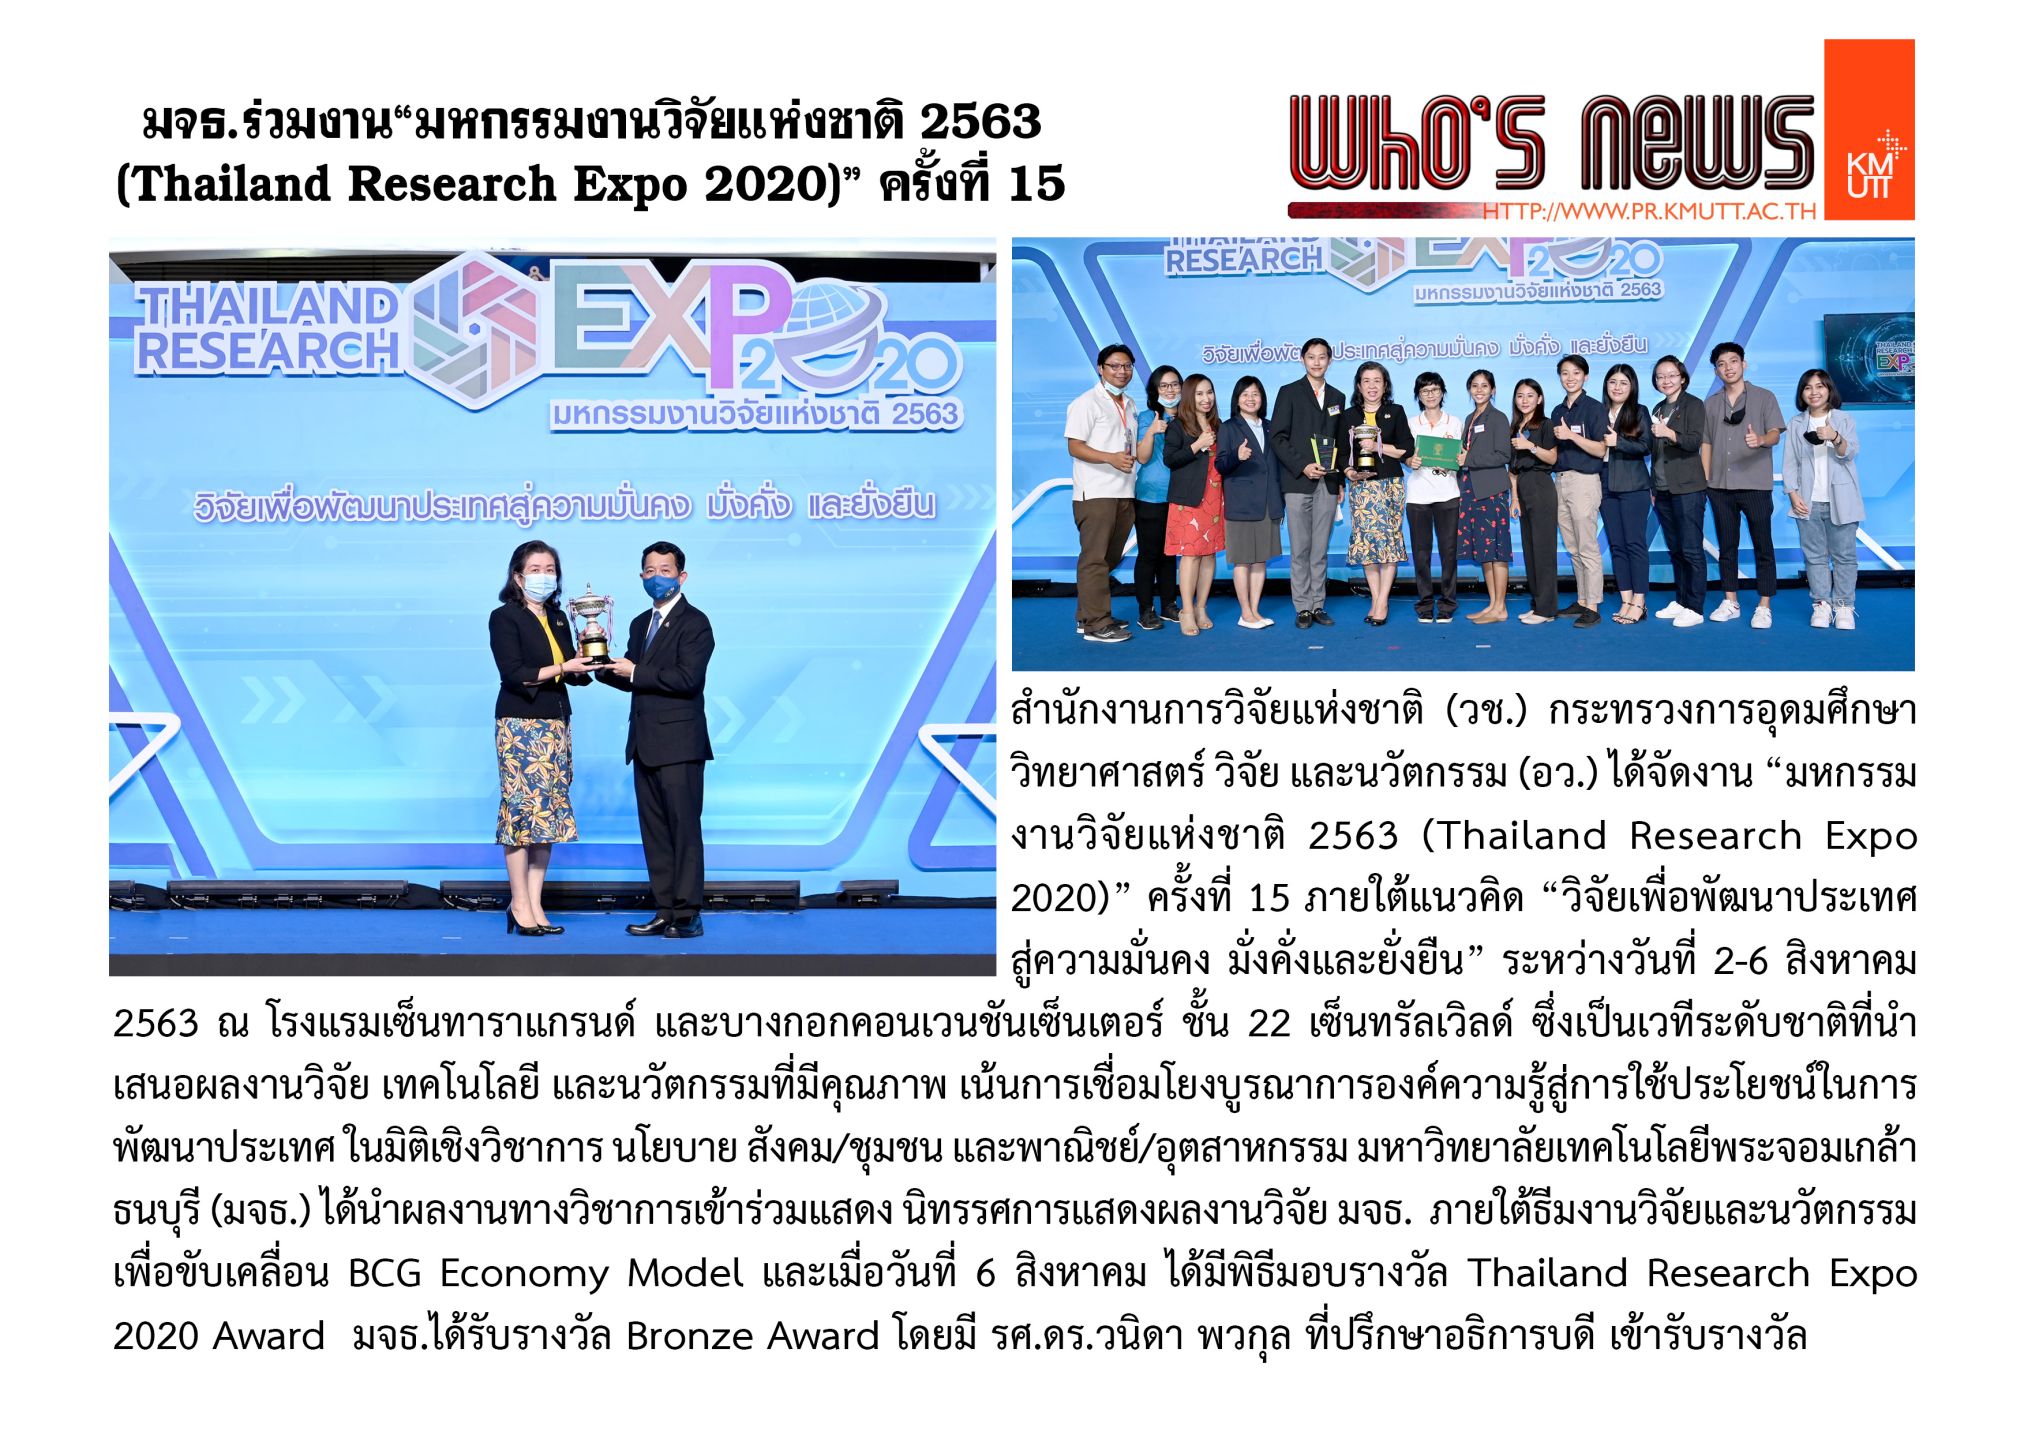 KMUTT joins 15th Thailand Research Expo 2020